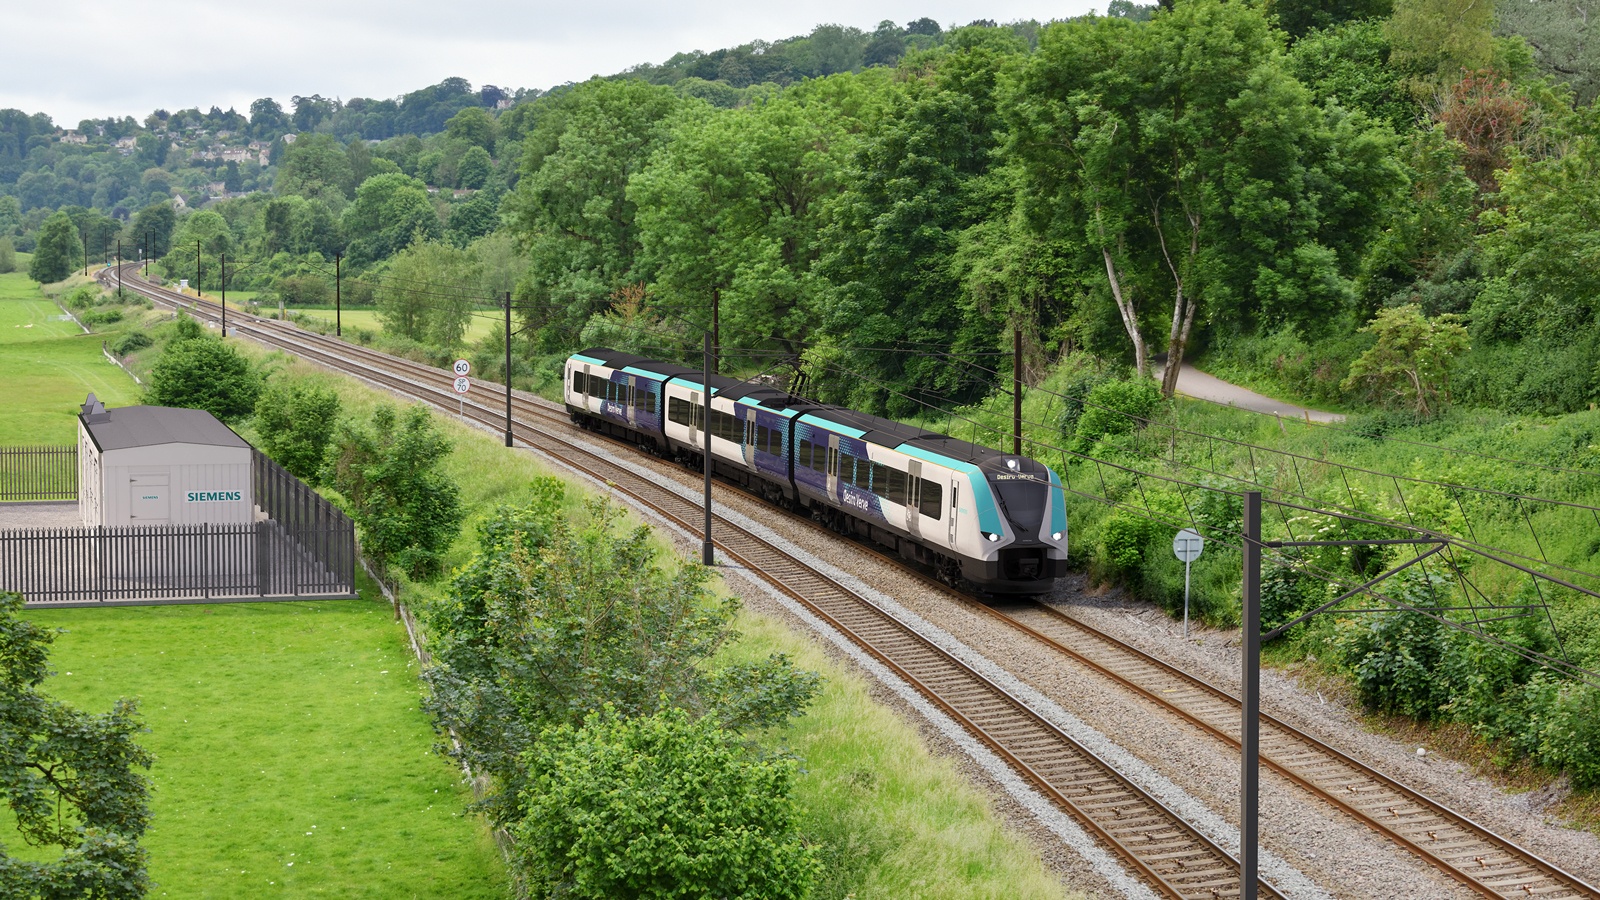 Battery-powered trains could cut CO2 while saving Britain’s railways £3.5bn